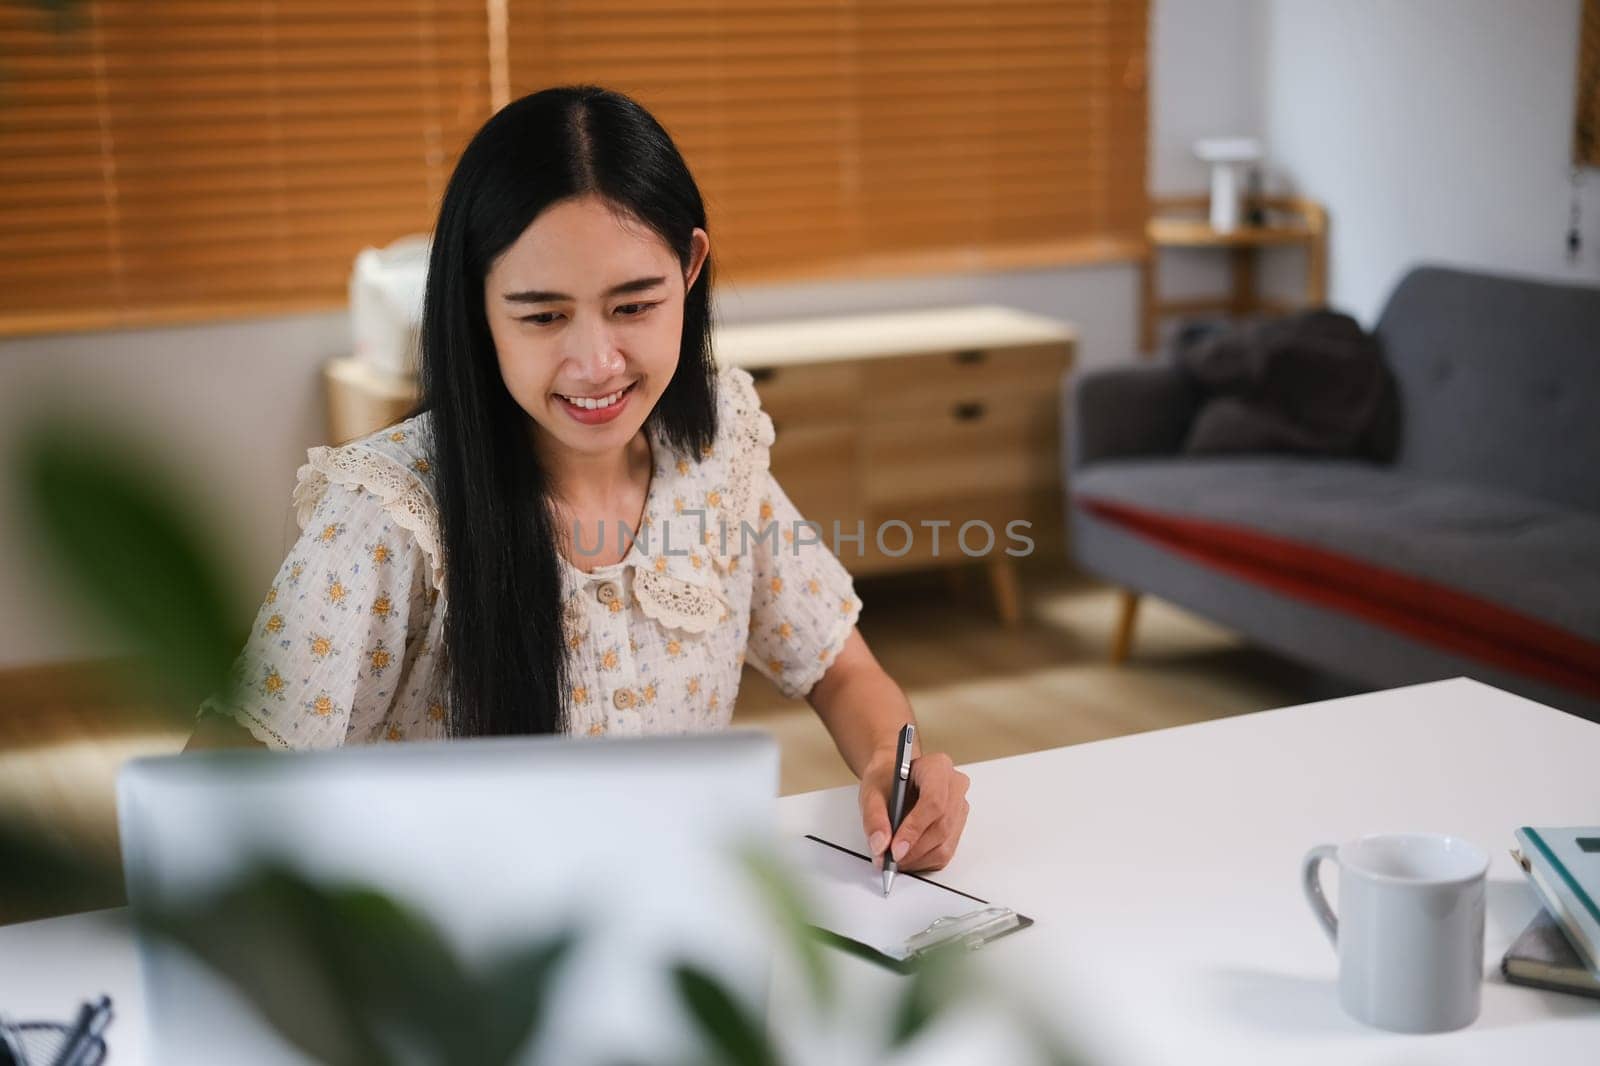 Beautiful woman using laptop at home, sending email or browsing internet. People and technology concept.